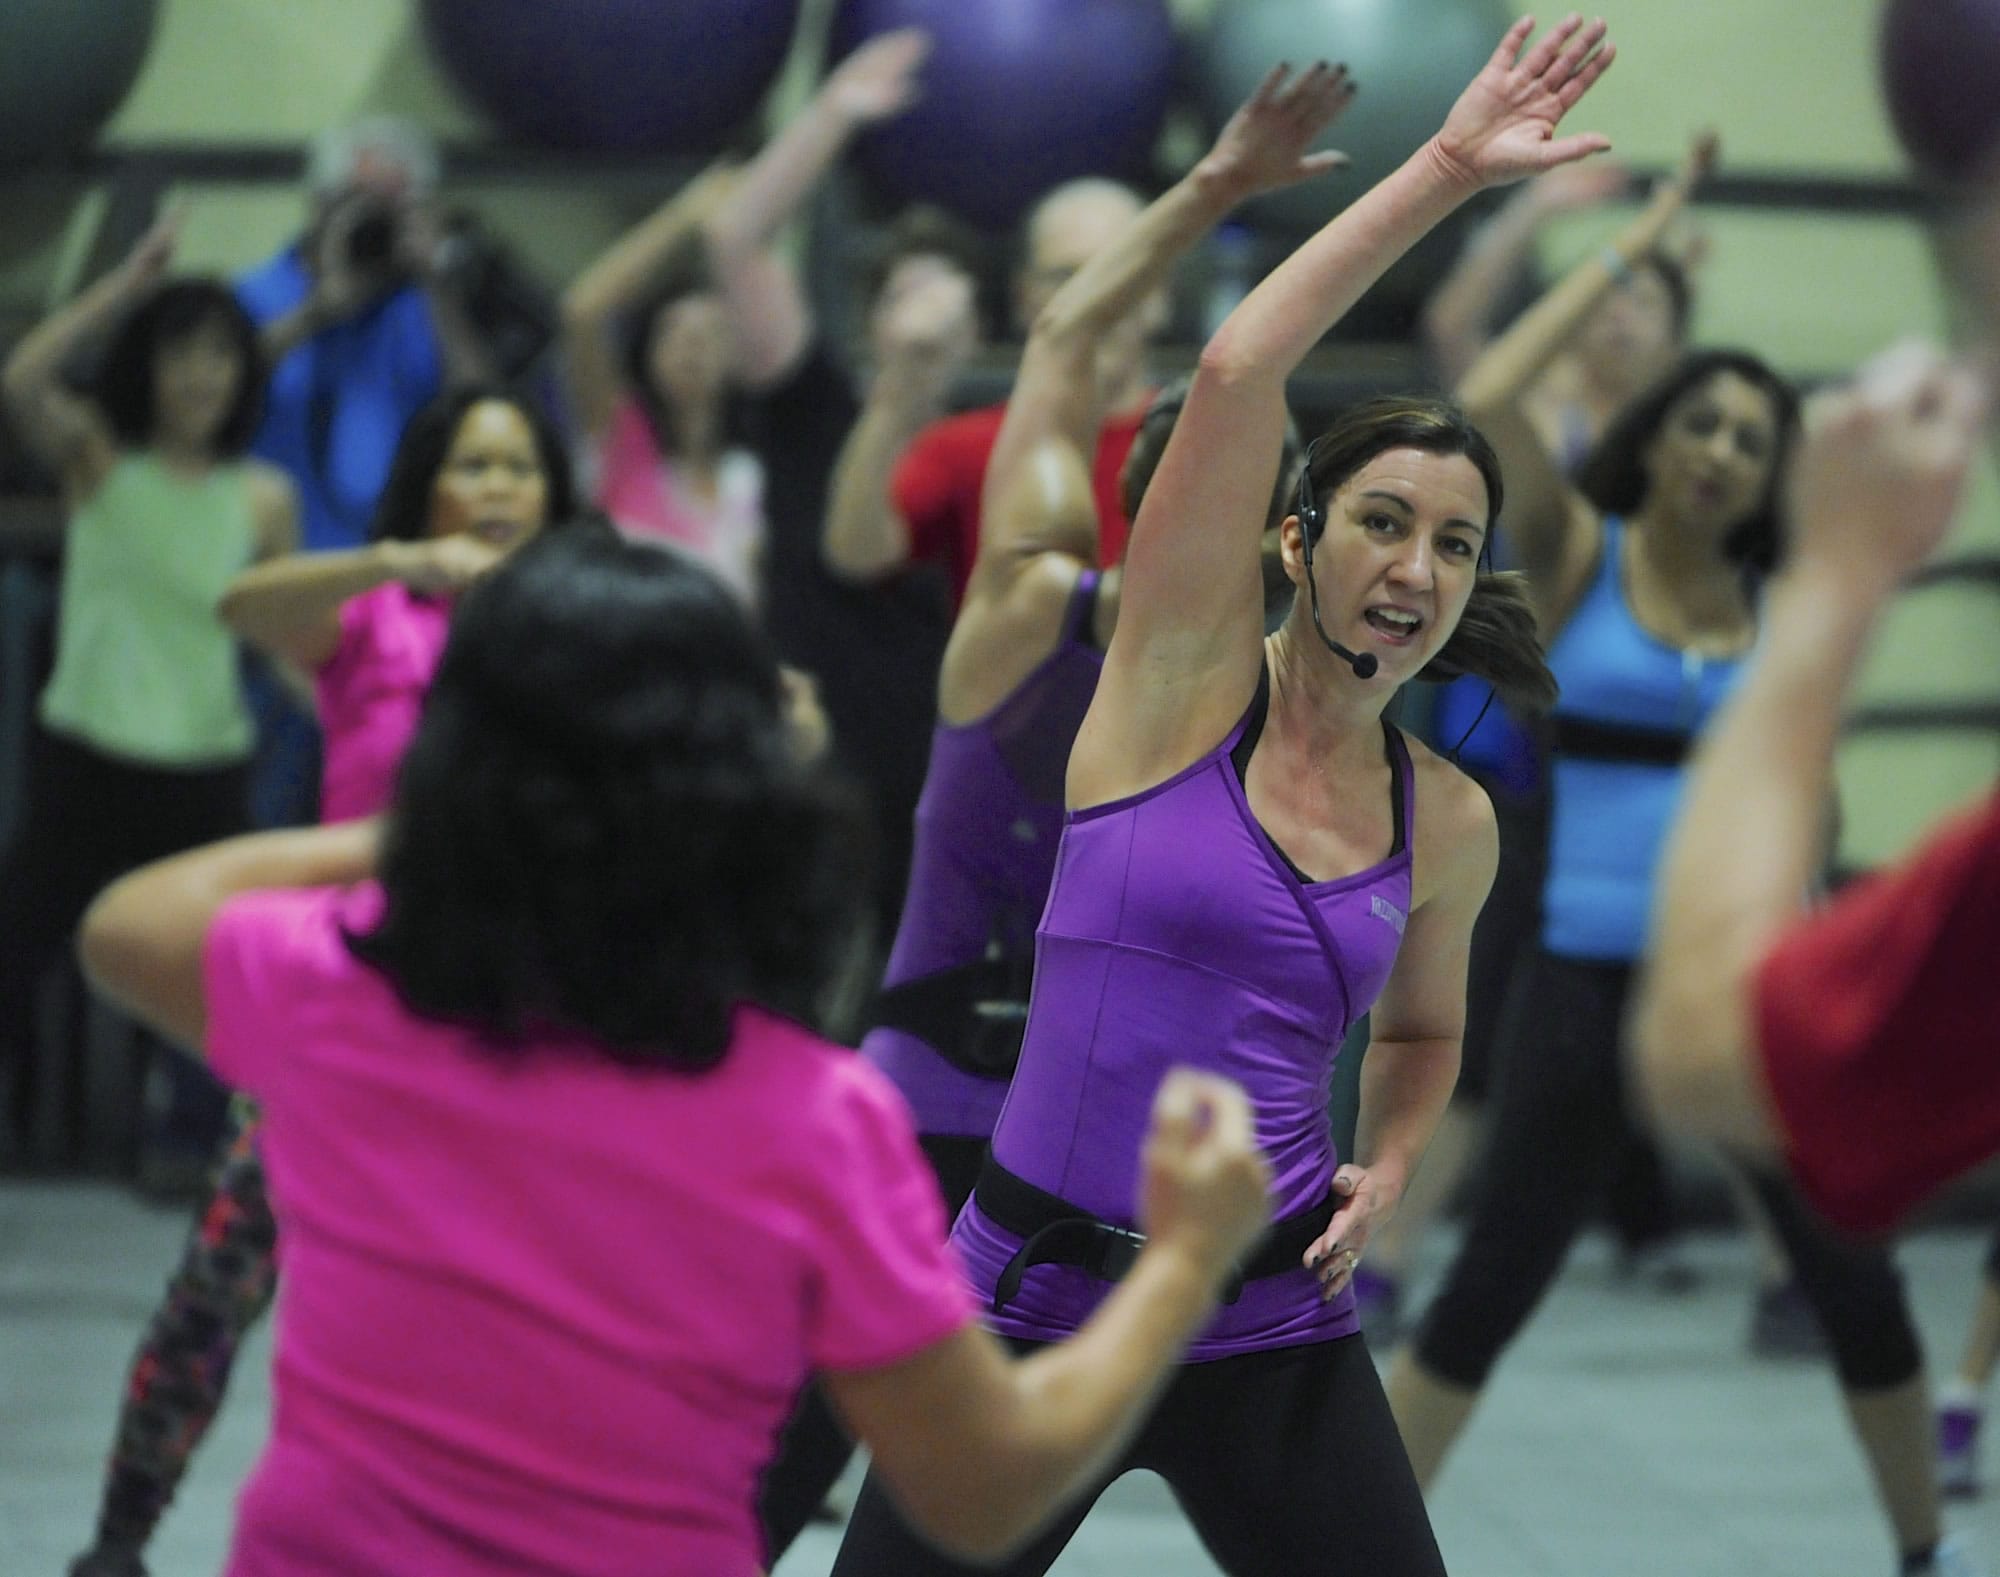 Jazzercise instructor Lisa Ackerman leads about 35 people through a class at LaCamas Swim &amp; Sport in Camas Wednesday.